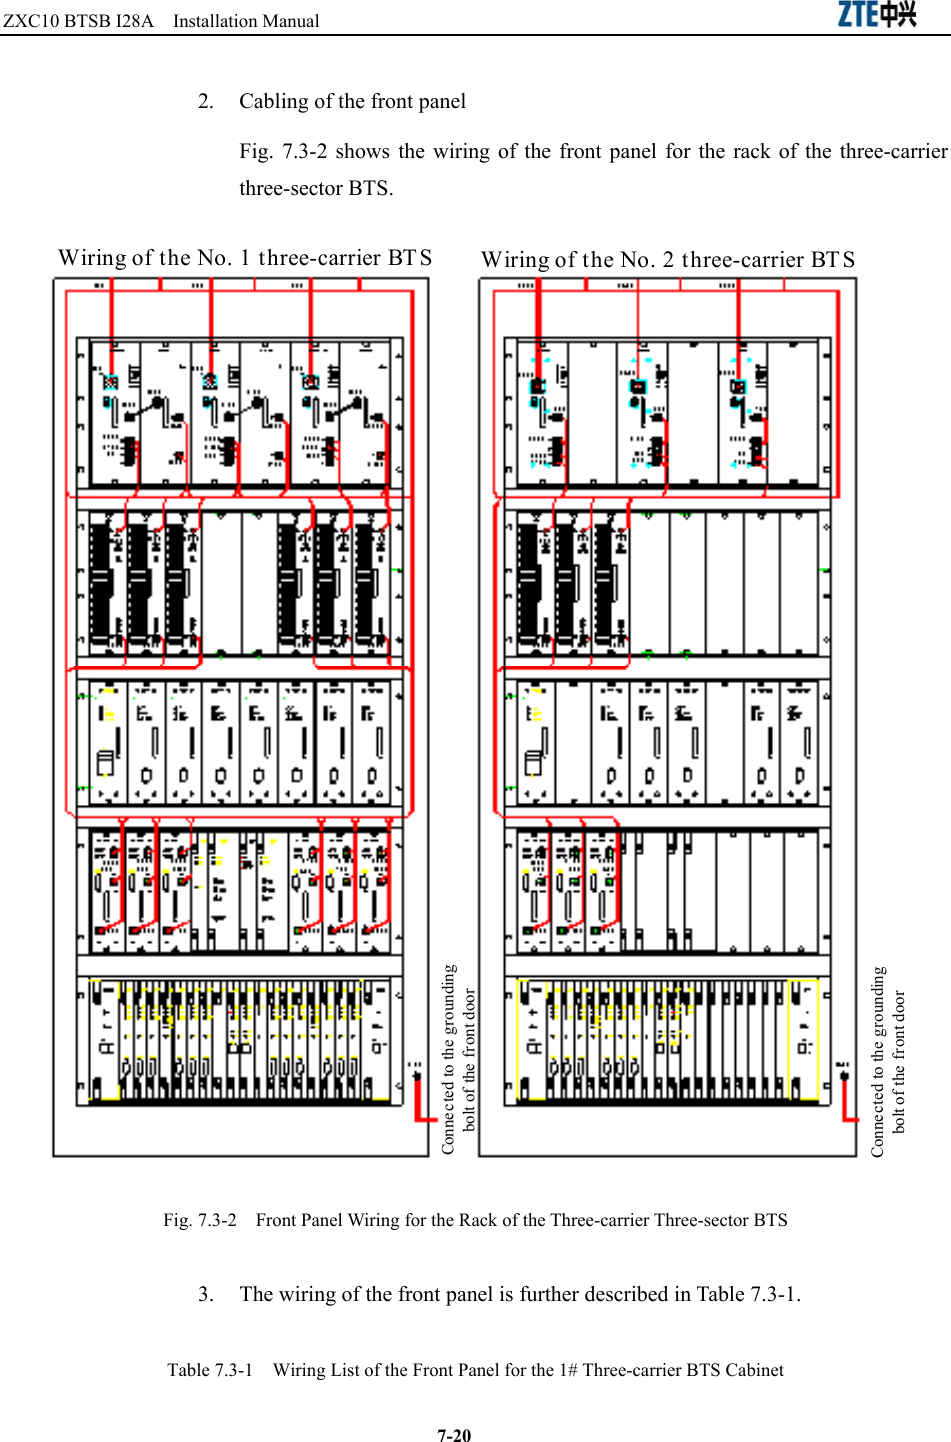 ZXC10 BTSB I28A  Installation Manual                                                          7-20 2.  Cabling of the front panel Fig. 7.3-2 shows the wiring of the front panel for the rack of the three-carrier three-sector BTS.   Wiring of the No. 1 three-carrier BTS Wiring of the No. 2 three-carrier BTSConnected to the groundingbolt of the front doorConnected to the groundingbolt of the front door Fig. 7.3-2    Front Panel Wiring for the Rack of the Three-carrier Three-sector BTS 3.  The wiring of the front panel is further described in Table 7.3-1. Table 7.3-1    Wiring List of the Front Panel for the 1# Three-carrier BTS Cabinet 